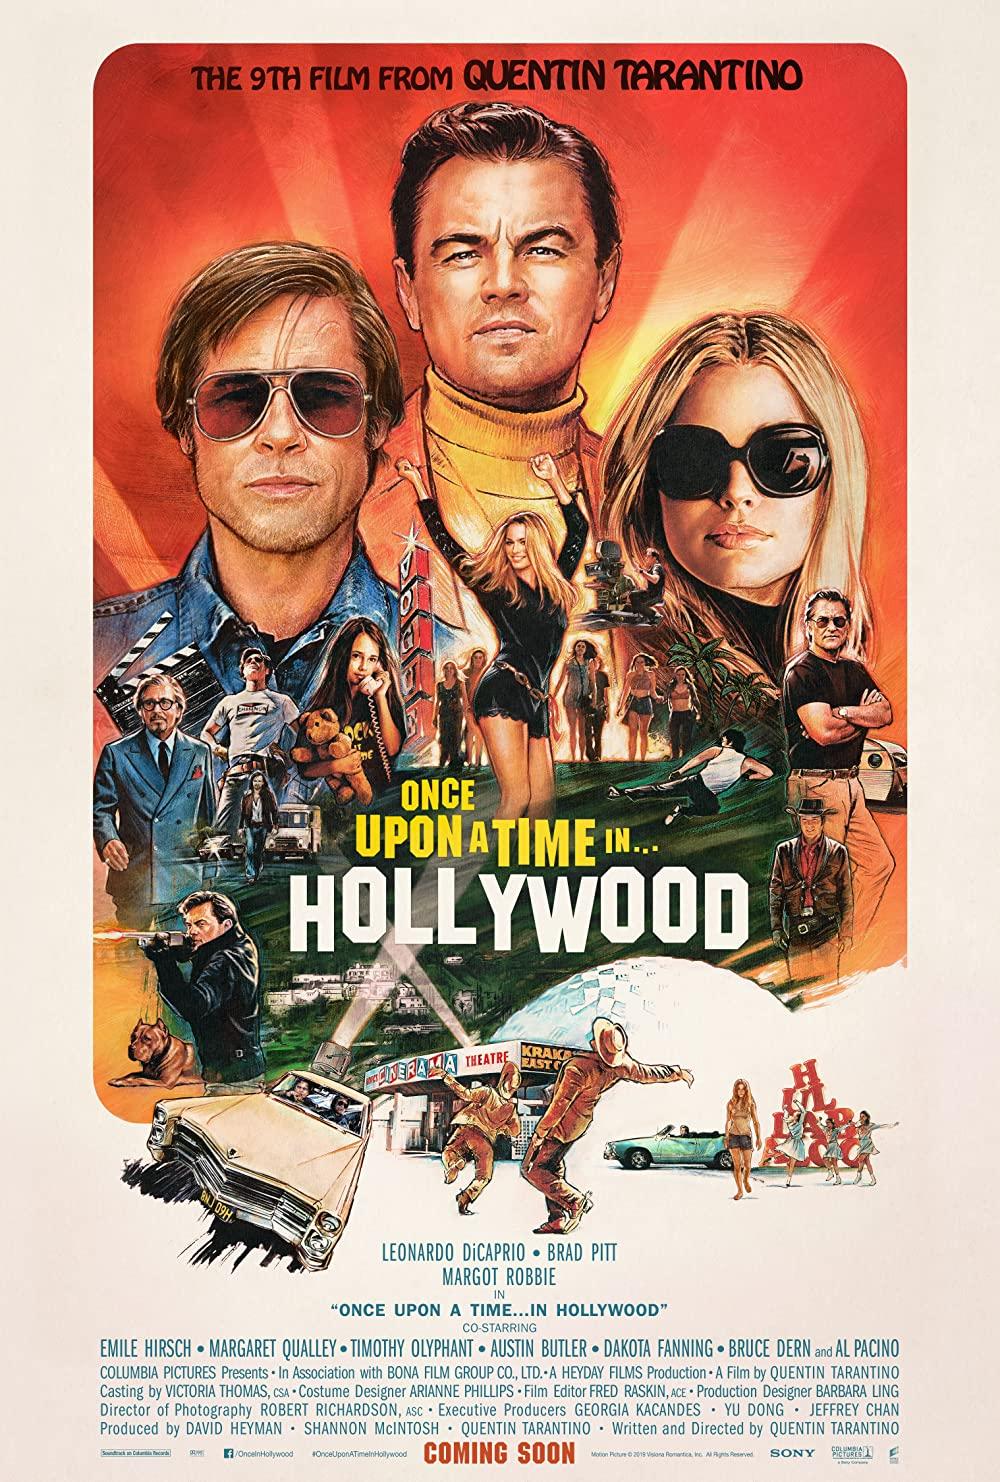 2. ONCE UPON A TIME IN HOLLYWOOD 